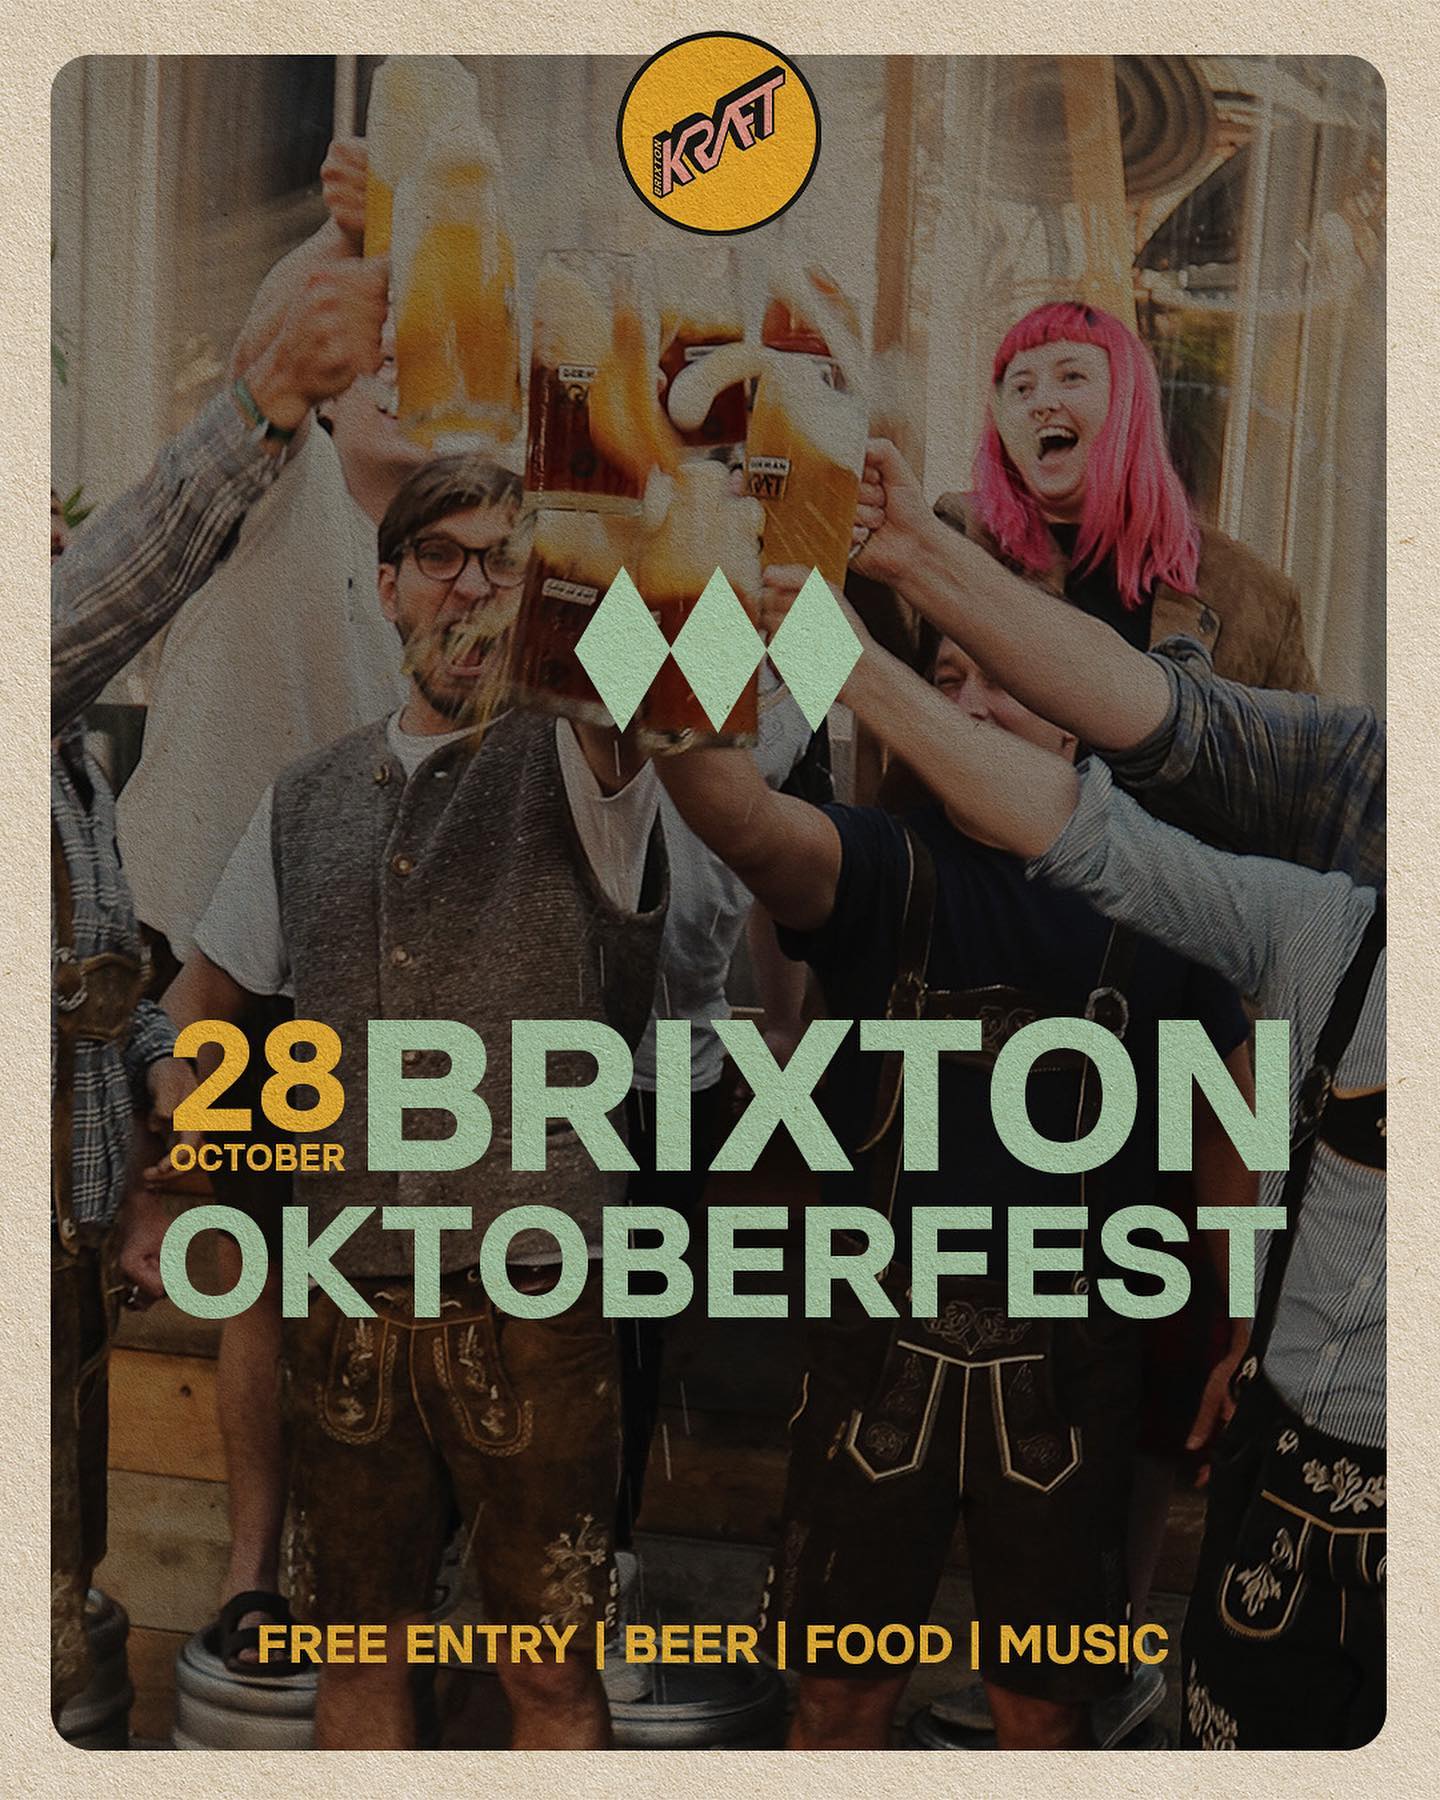 Oktoberfest season! 🍺🥨
Save the dates:
🔹Elephant & Castle 6th & 7th October
🔹Mayfair 14th October
🔹Dalston 21st October
🔹Brixton 28th October

Each festivity will have it’s own. Theme and focus. Check out our website for more info! 🍺🥨